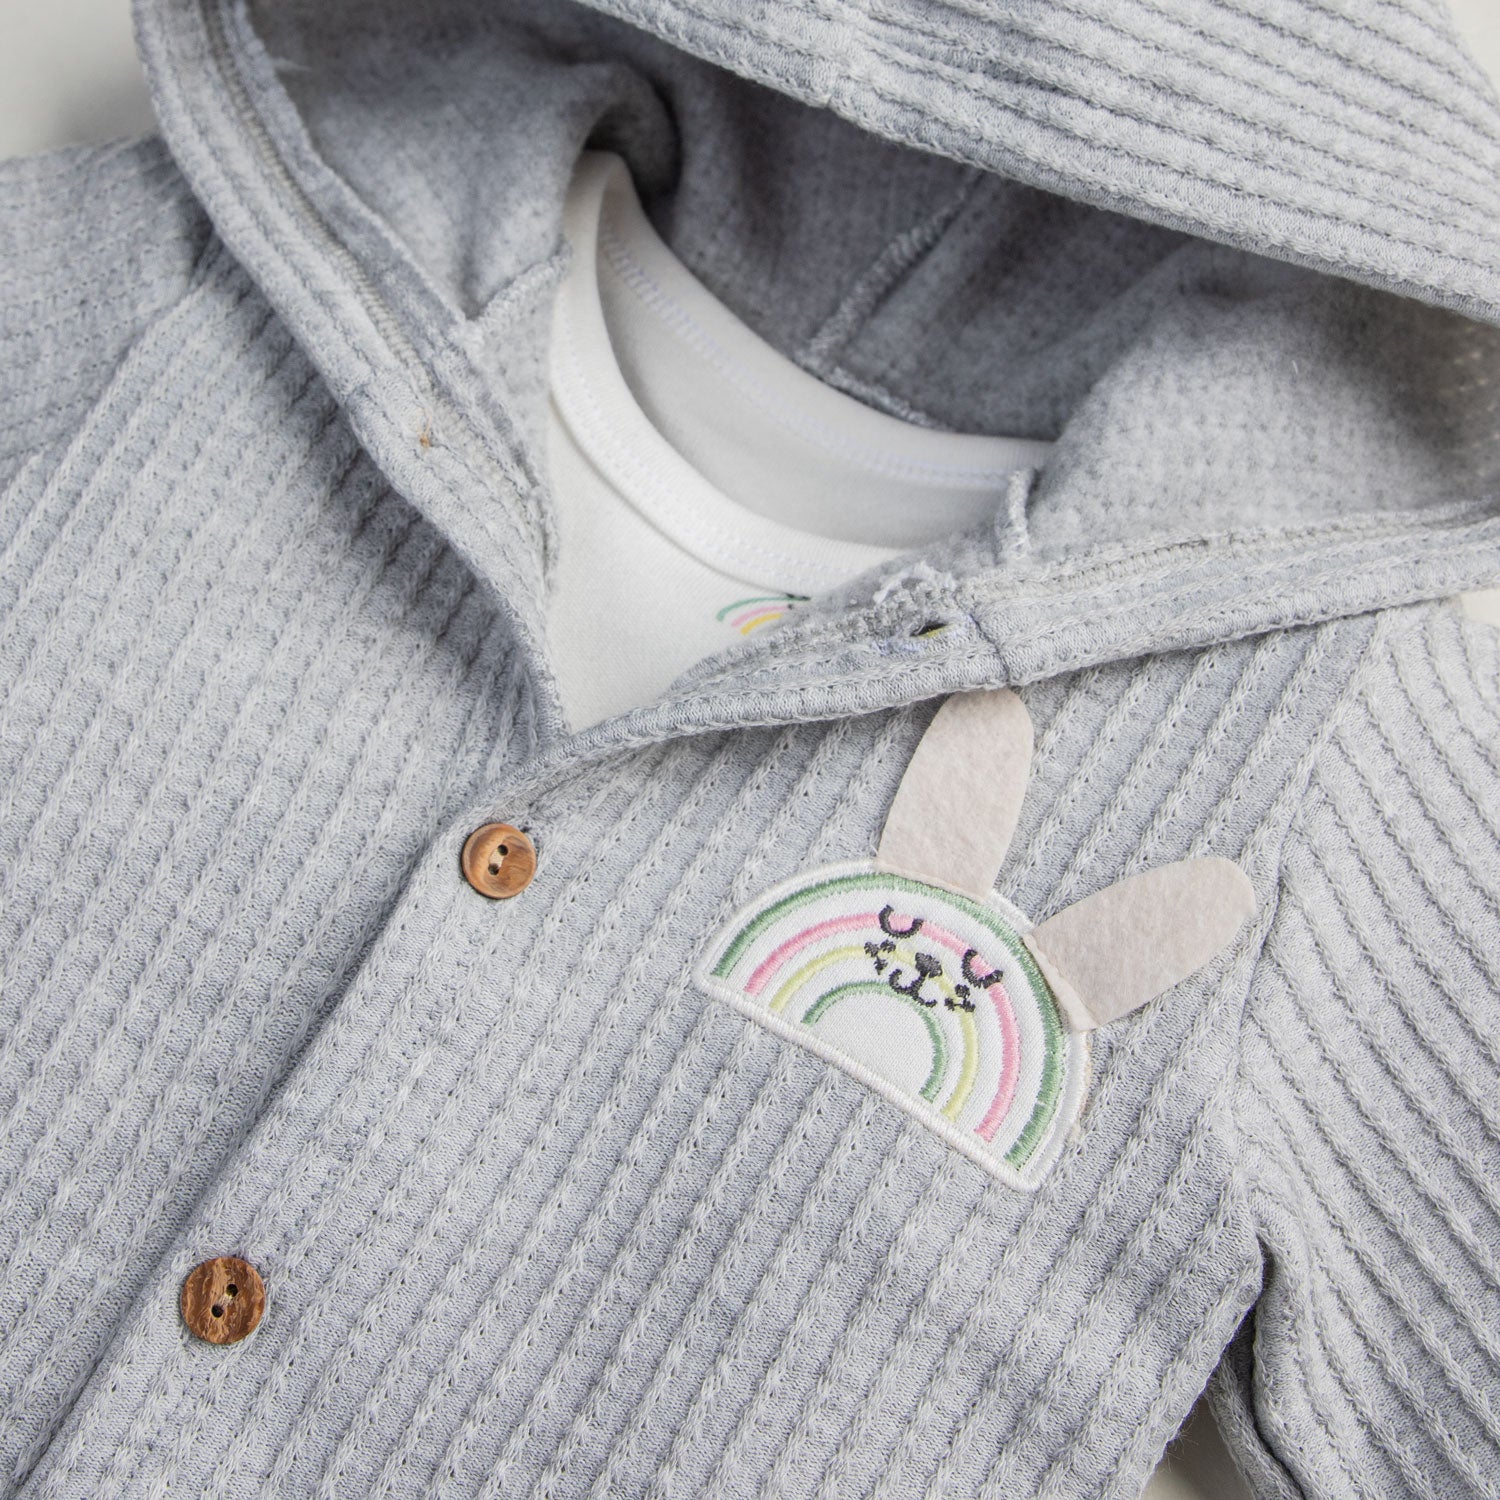 Three-Piece Baby Rainbow Hooded and Trouser Set